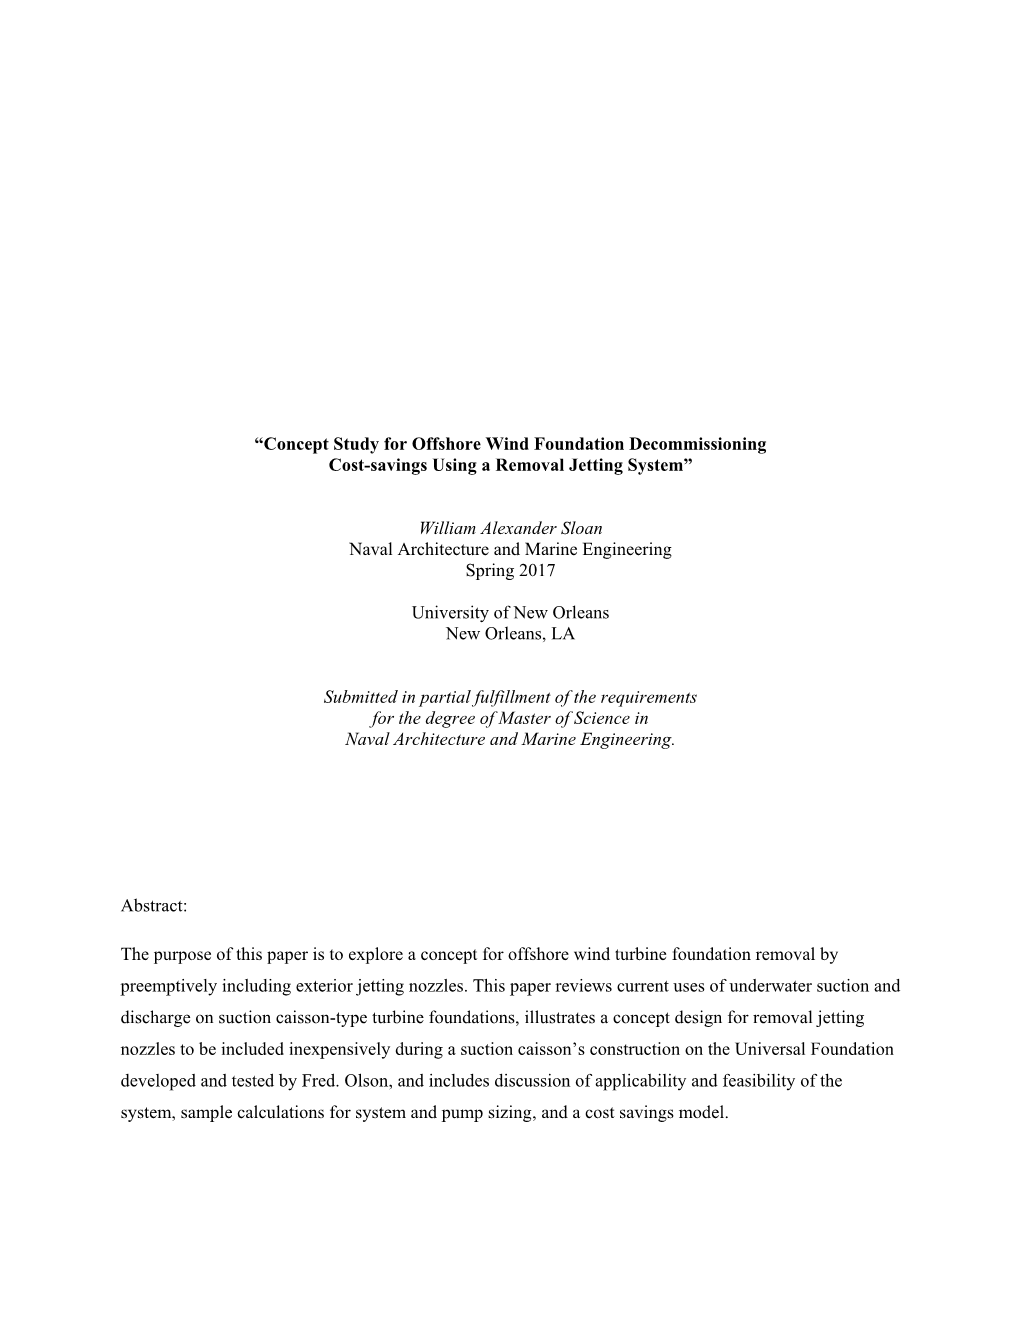 “Concept Study for Offshore Wind Foundation Decommissioning Cost-Savings Using a Removal Jetting System”